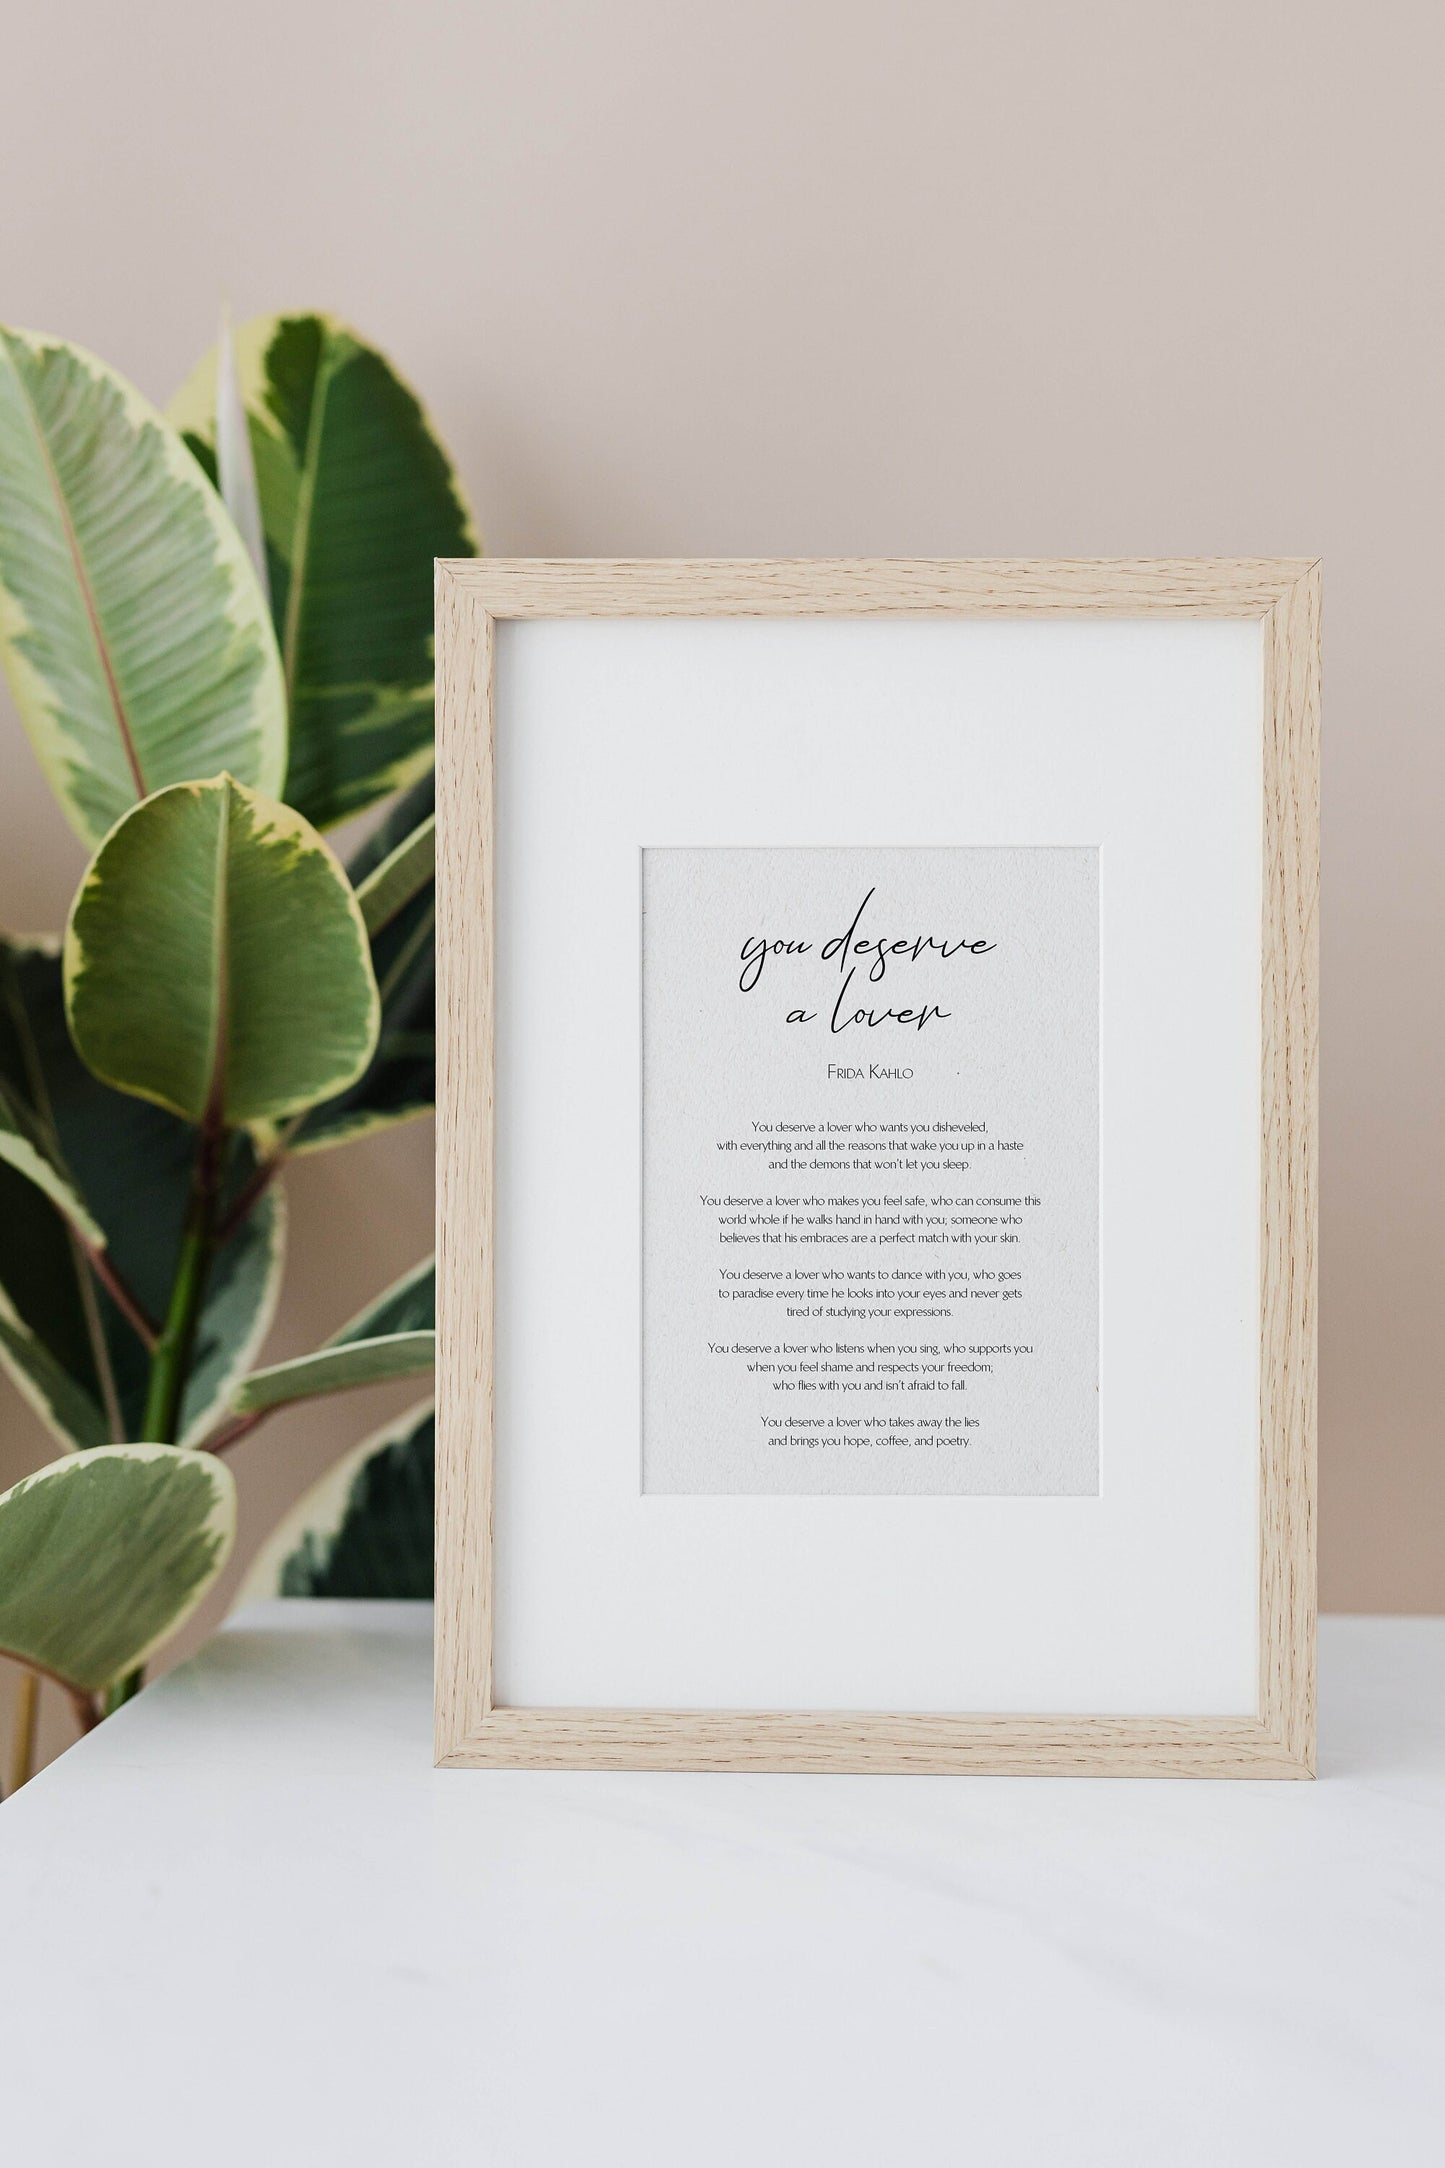 You deserve a lover Poster by Frida Kahlo - Gift for friend or loved one - Mexican Poetry - Framed Print - Love Poem - Gift for partner